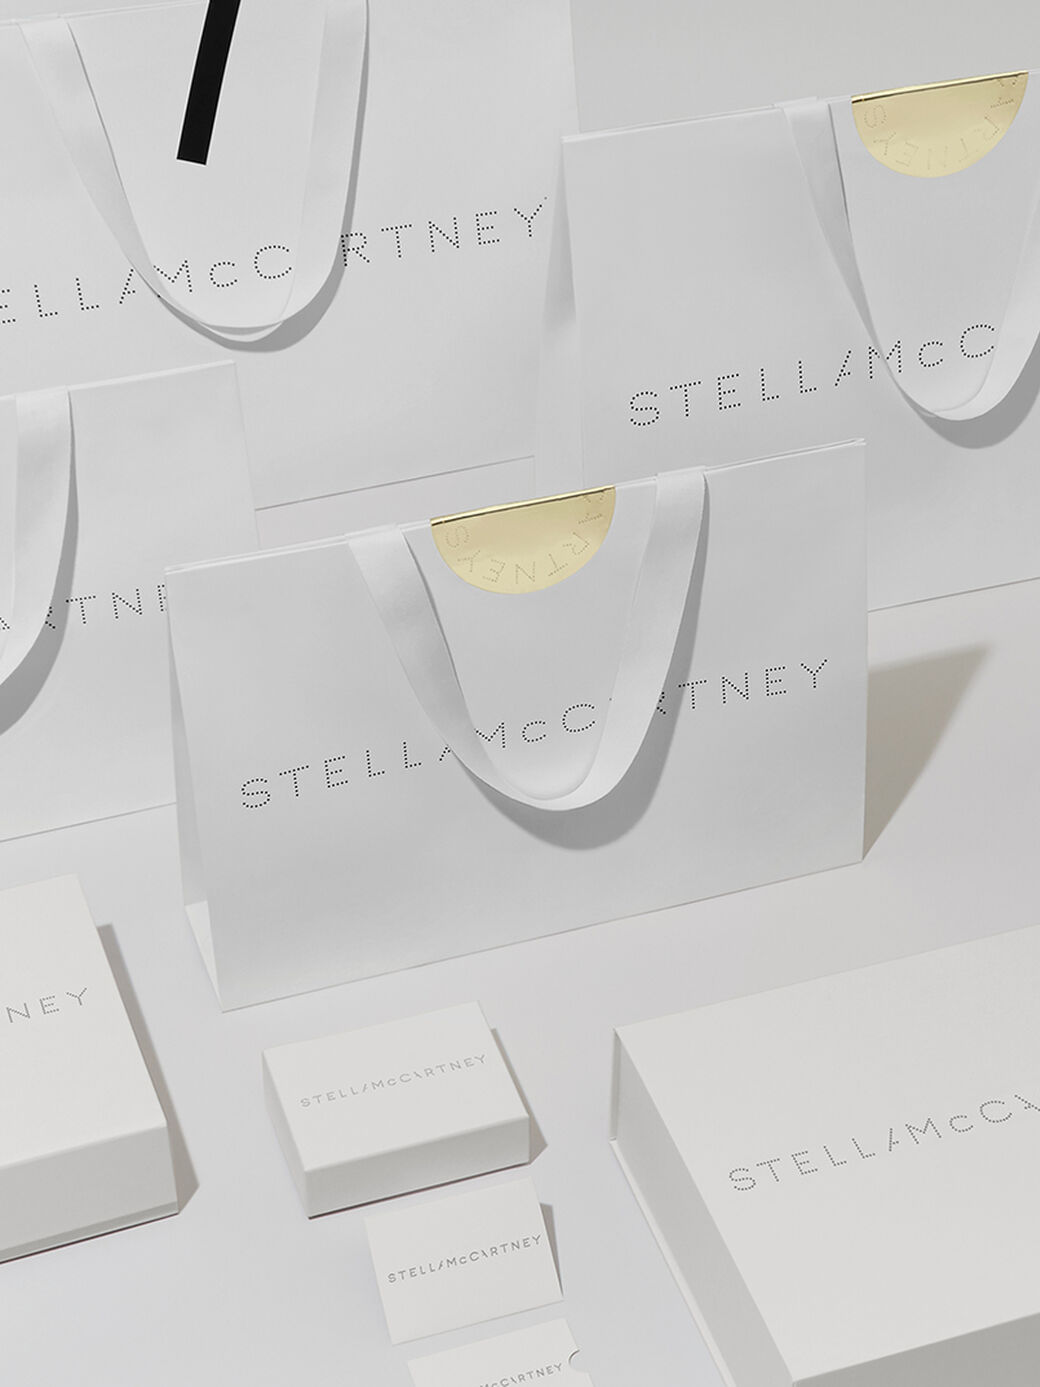 How the blockchain became Stella McCartney's sustainability